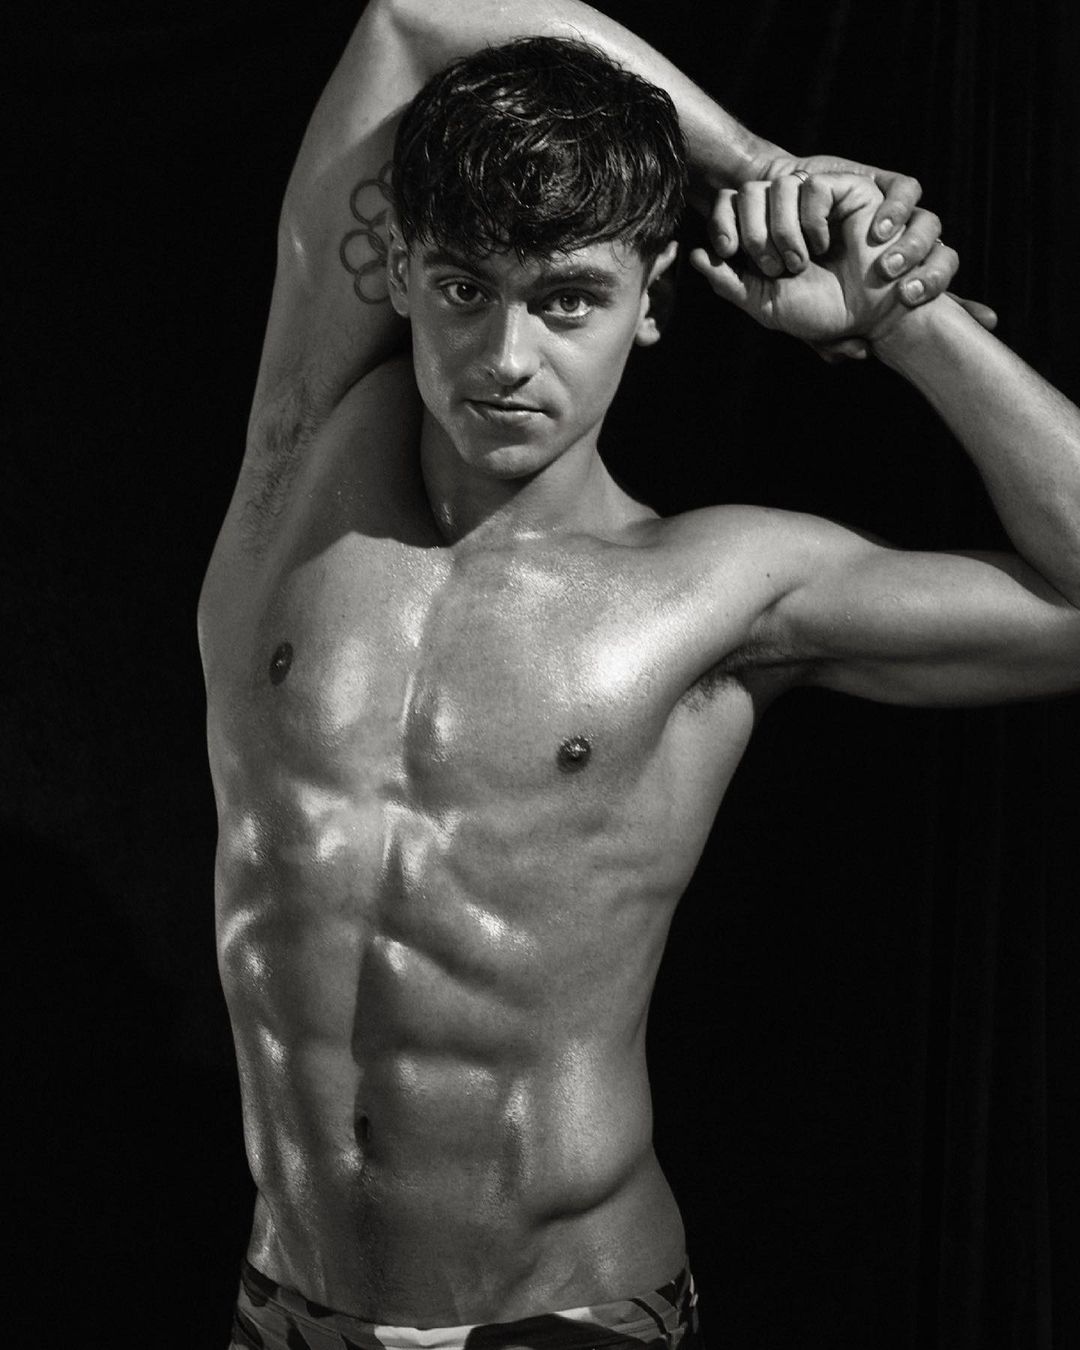 Tom Daley shares thirstquenching unseen images from Attitude cover